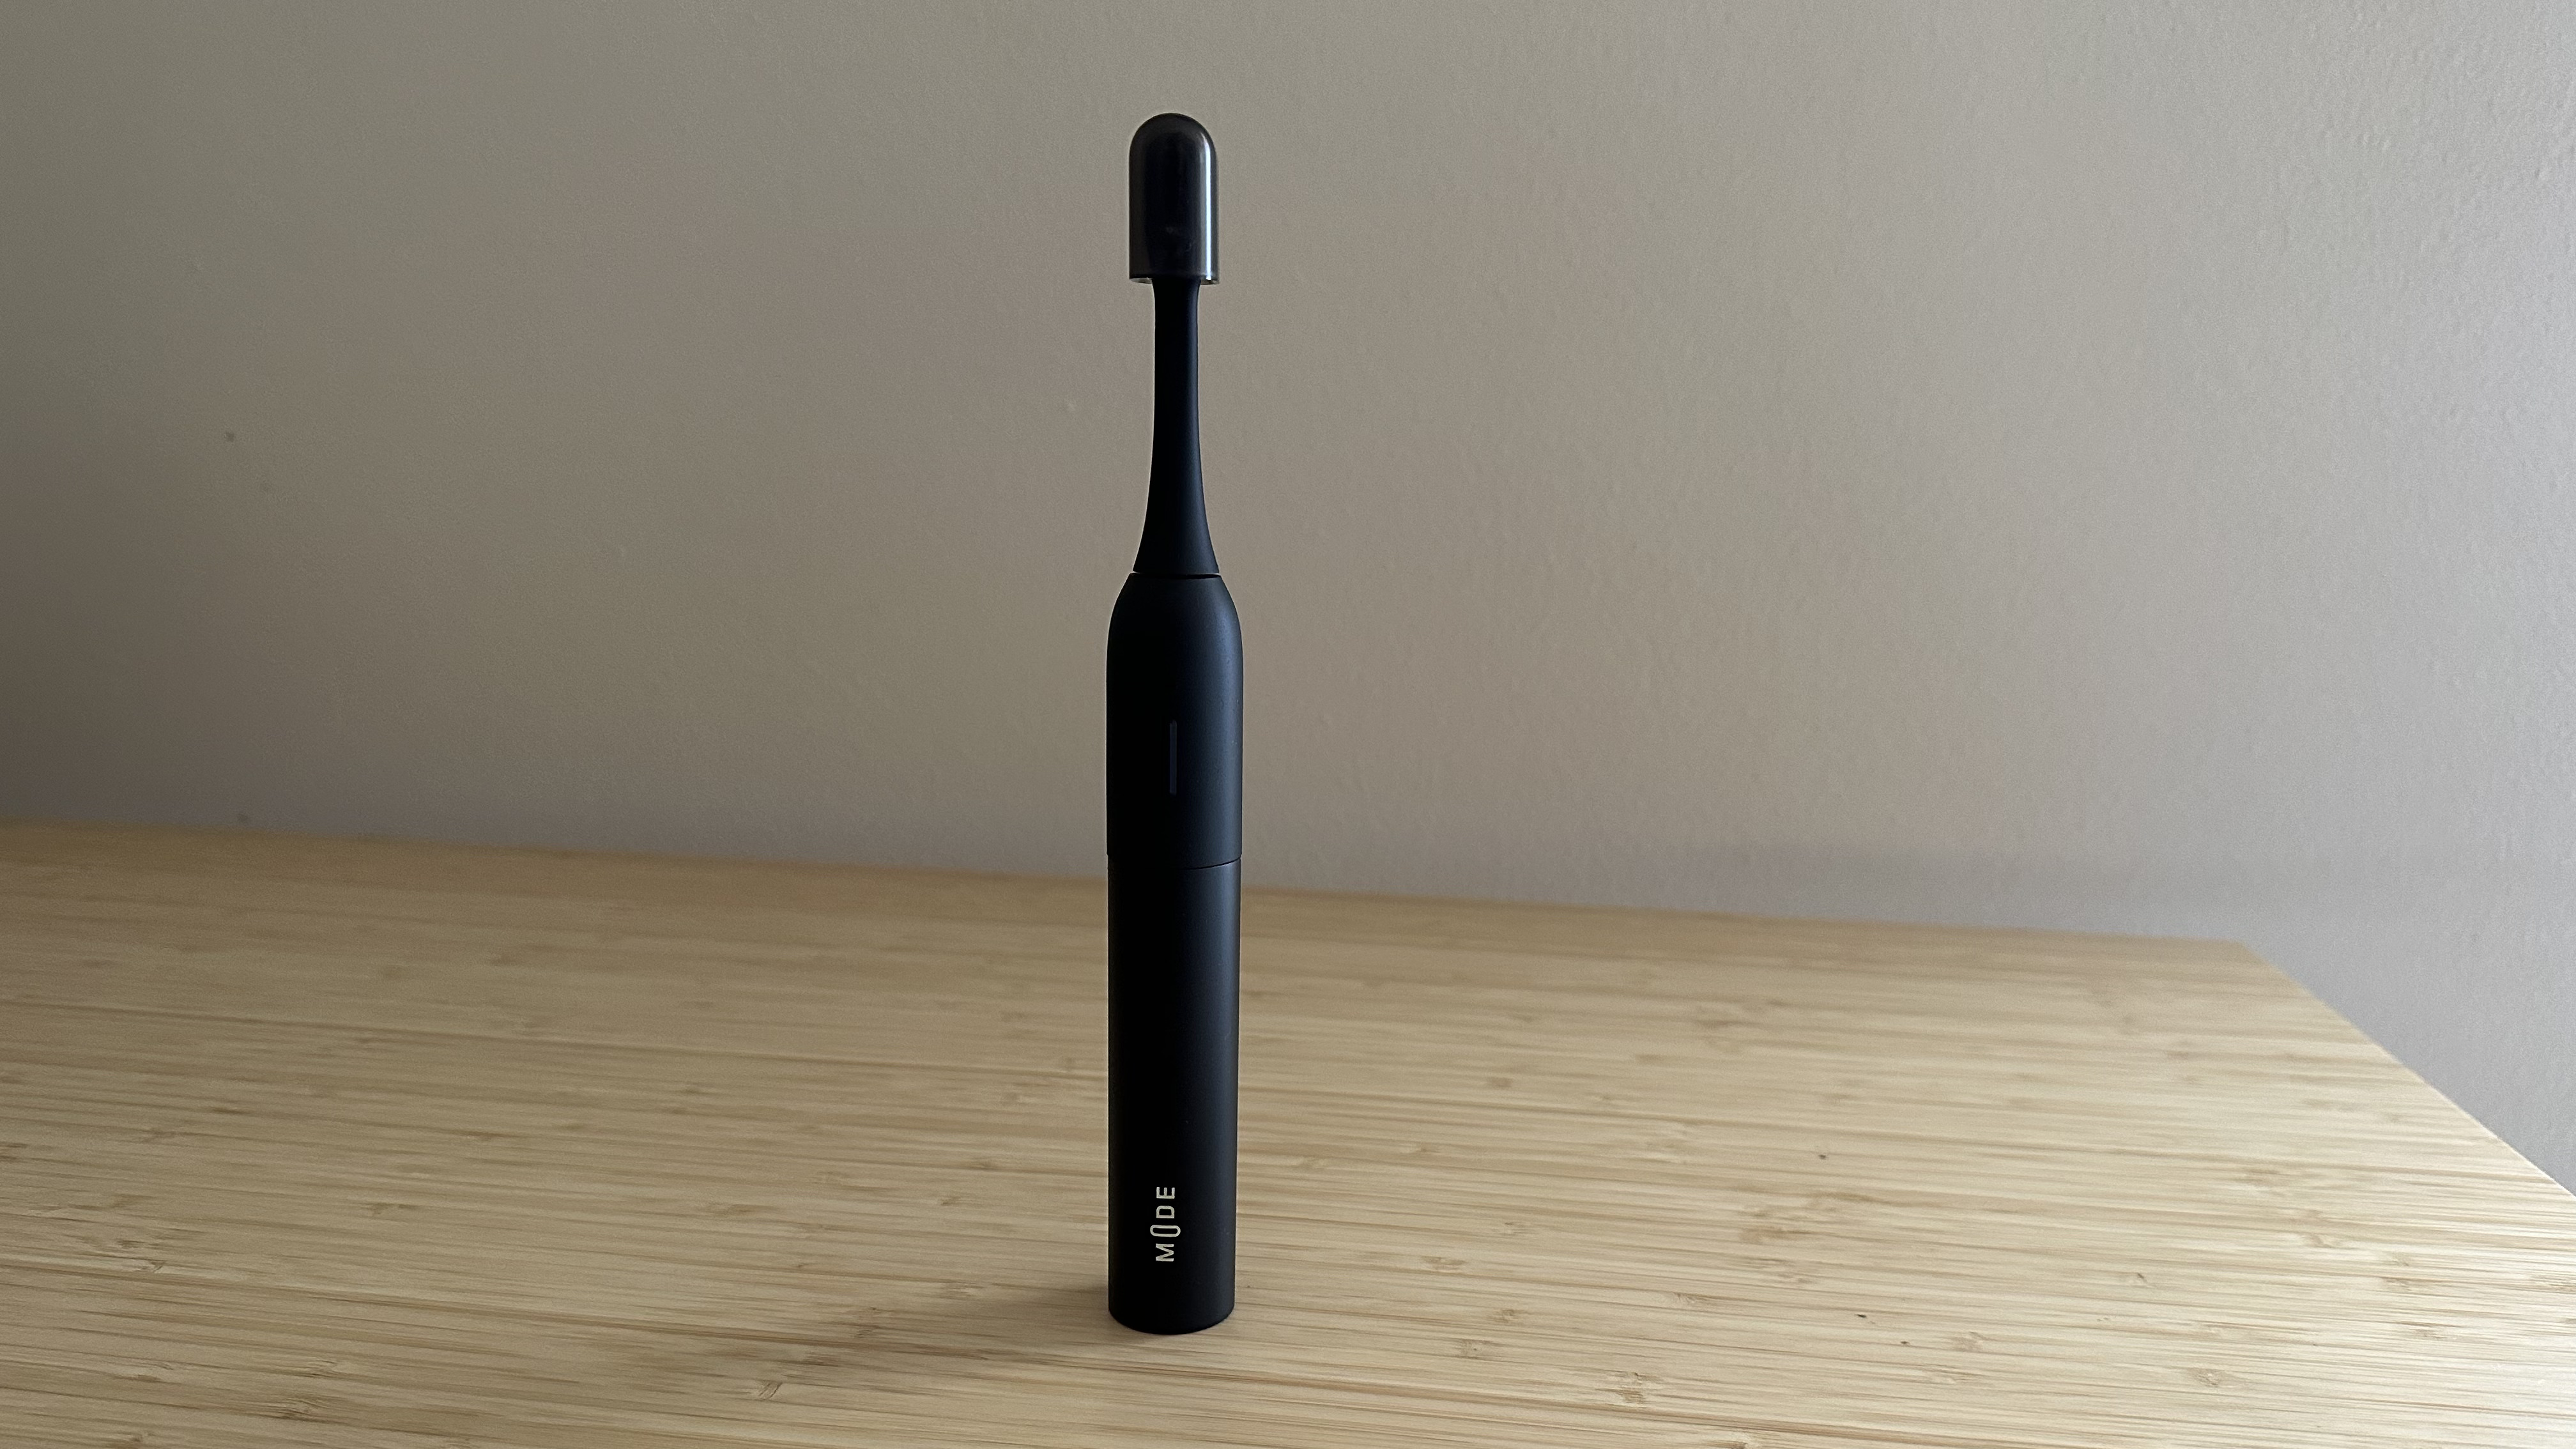 Mode Electric Toothbrush in black